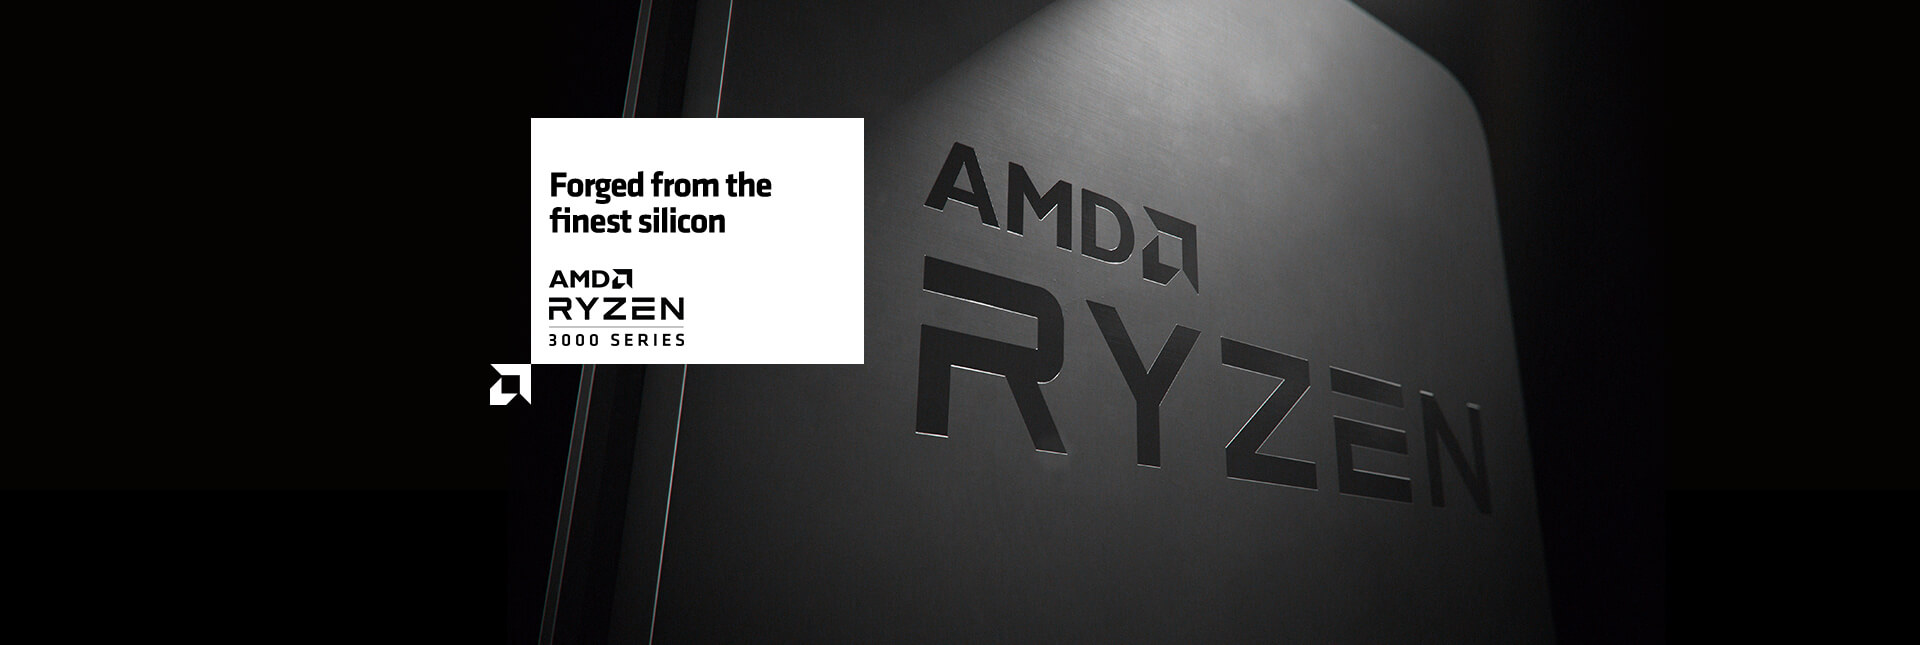 Forged from the finest silicon. AMD Ryzen 3000 Series